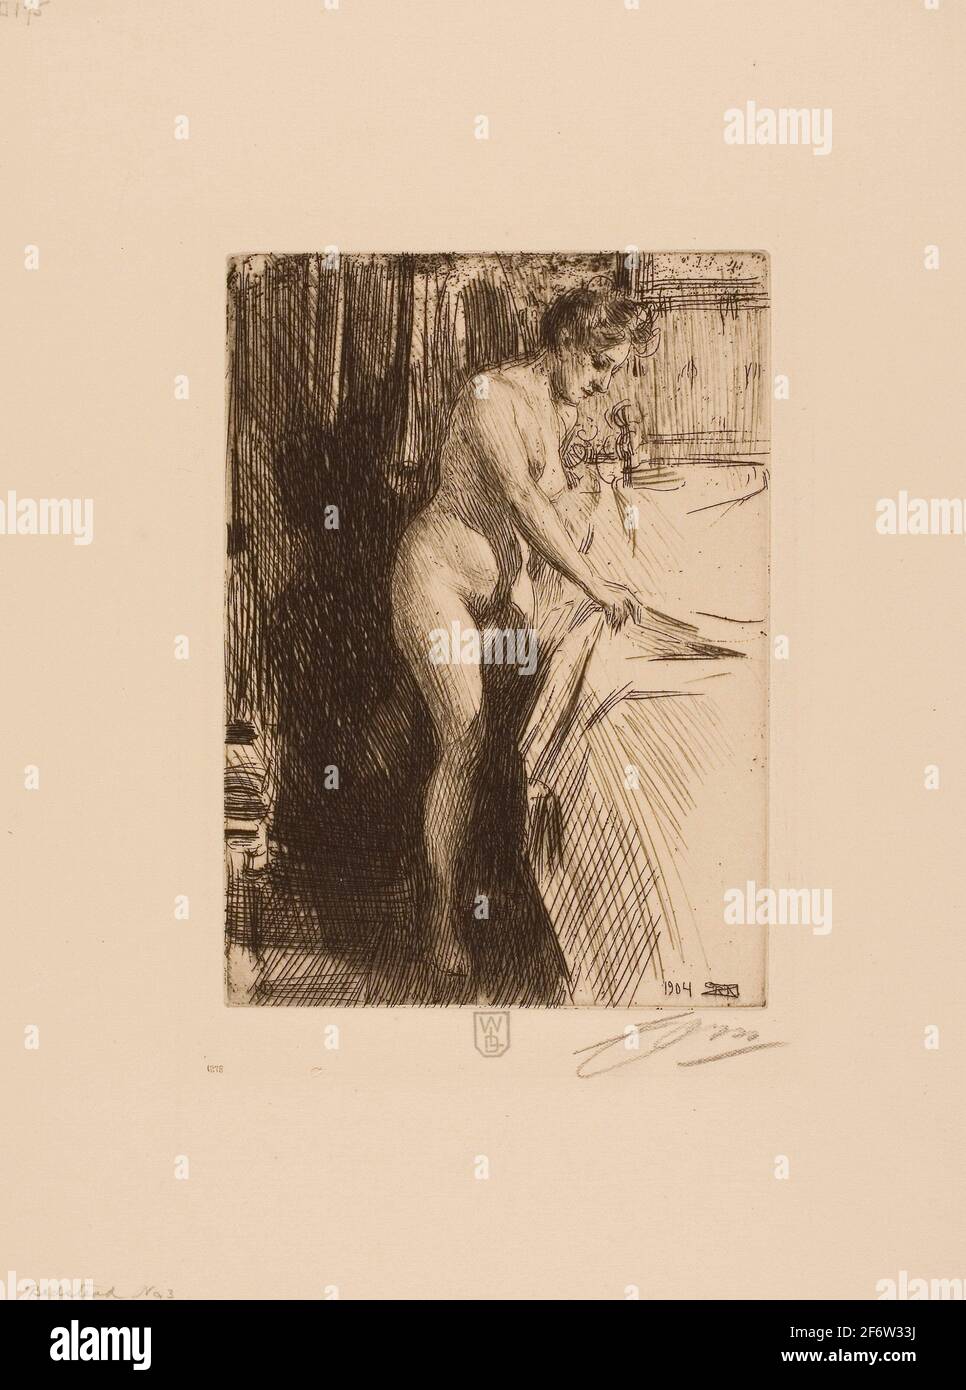 Author: Anders Zorn. Olandine - 1904 - Anders Zorn Swedish, 1860-1920. Etching on ivory laid paper. Sweden. Stock Photo